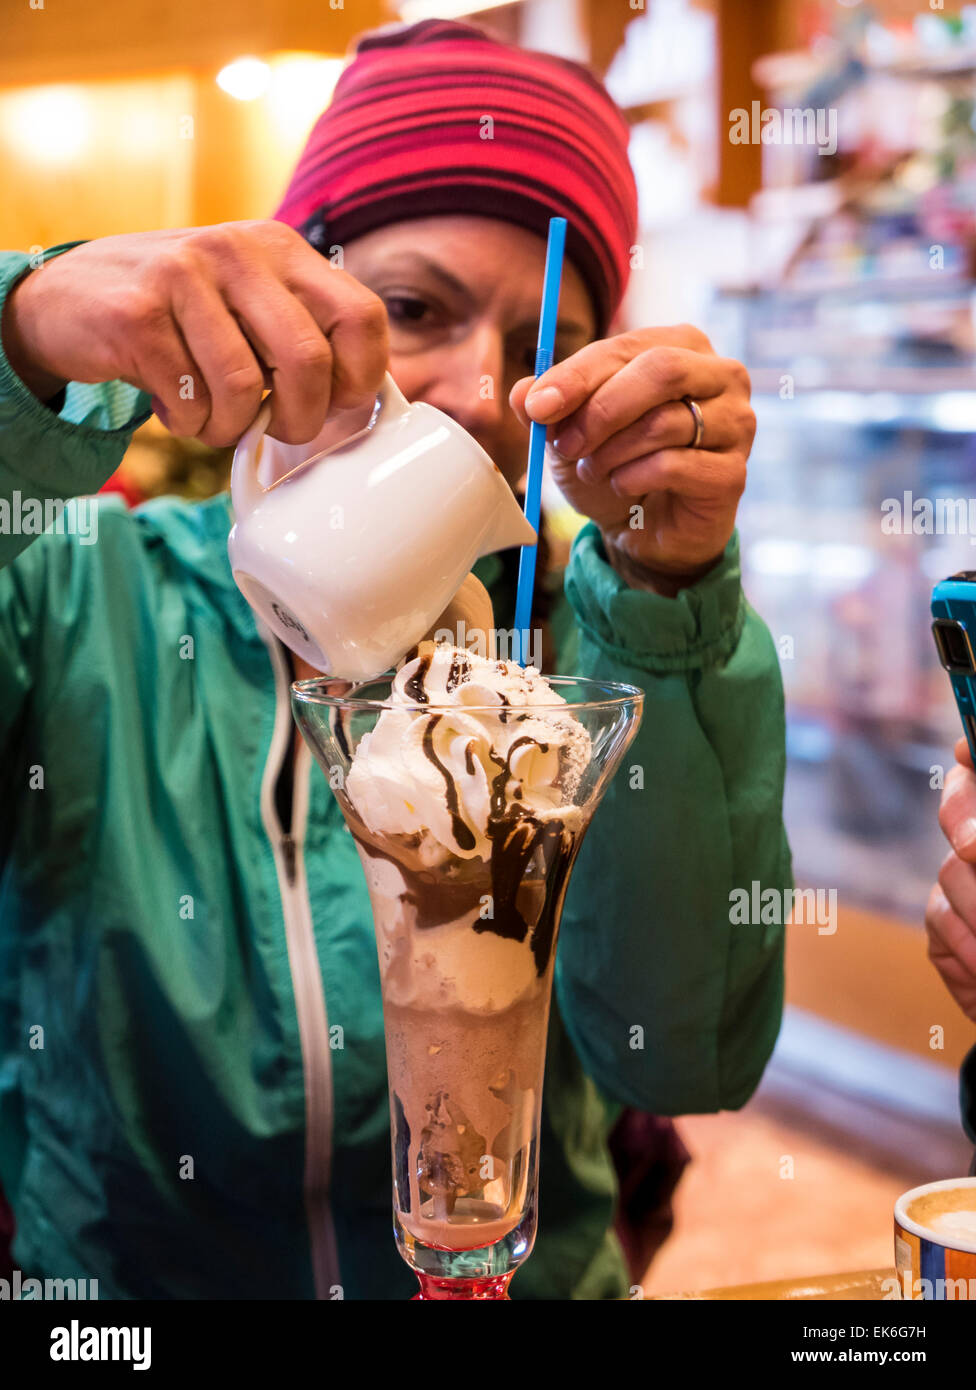 Woman pouring expresso coffee on fancy gelato treat Stock Photo